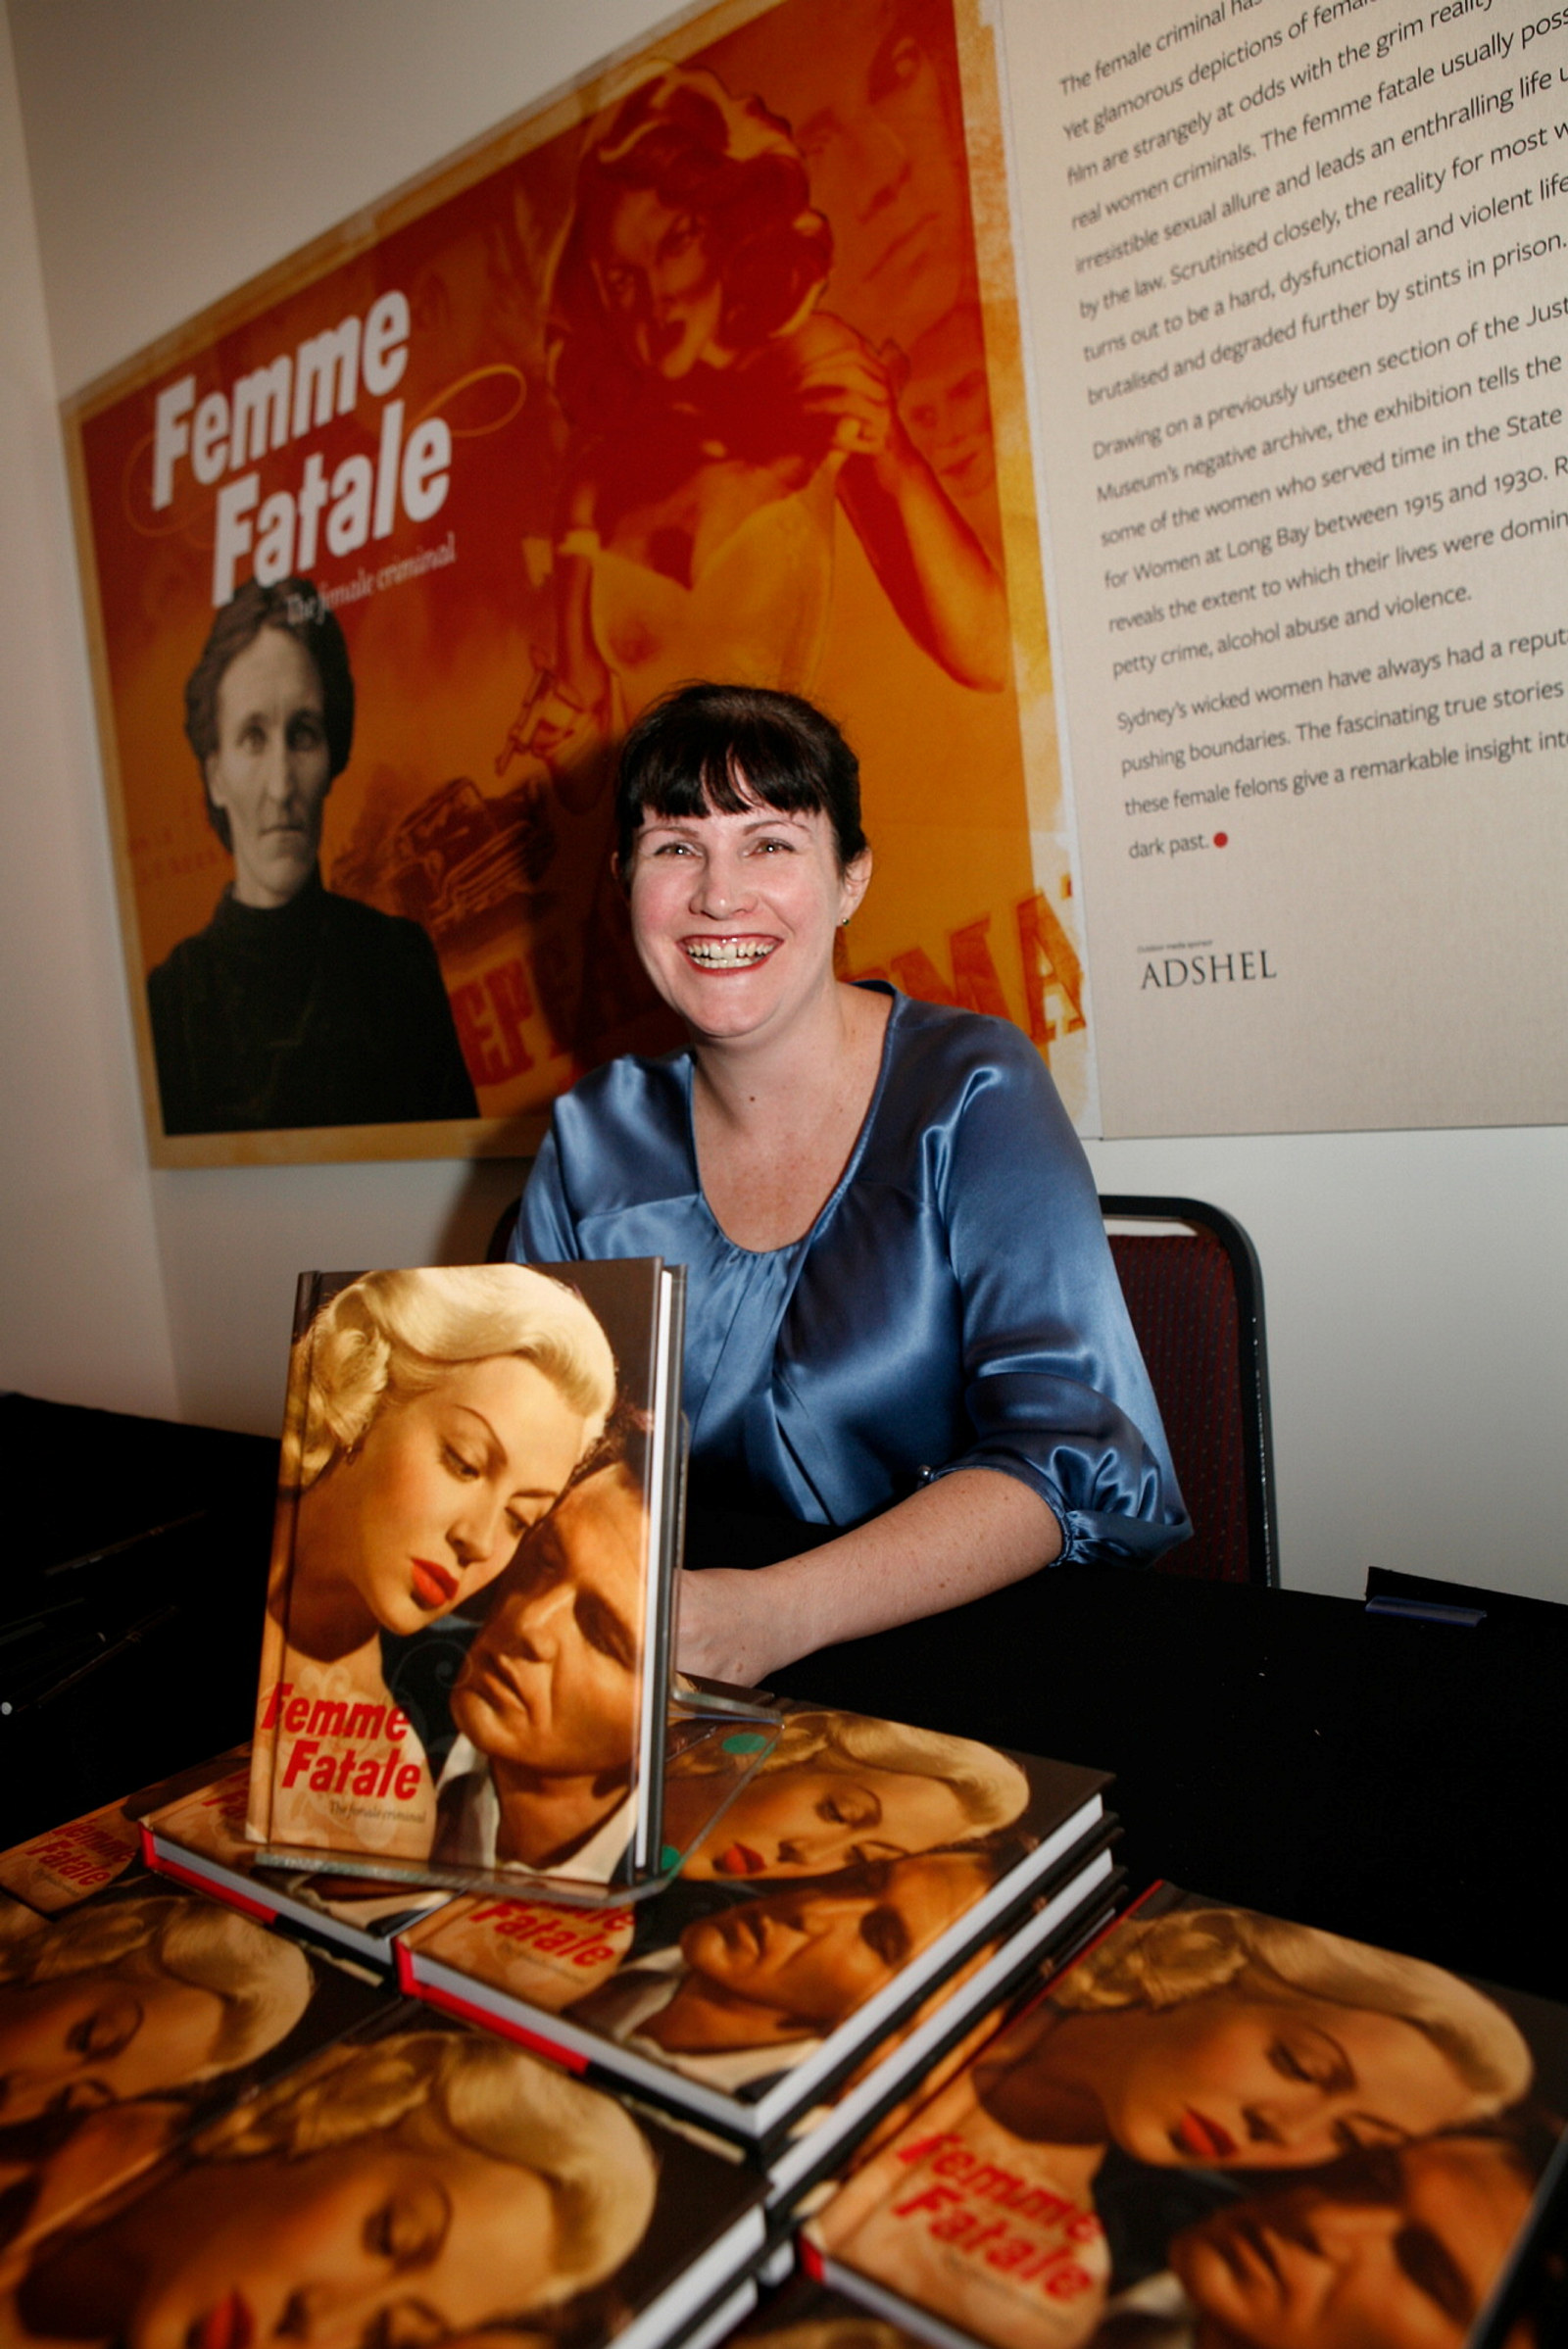 Nerida Campbell, curator of the Femme Fatale exhibition, at the launch